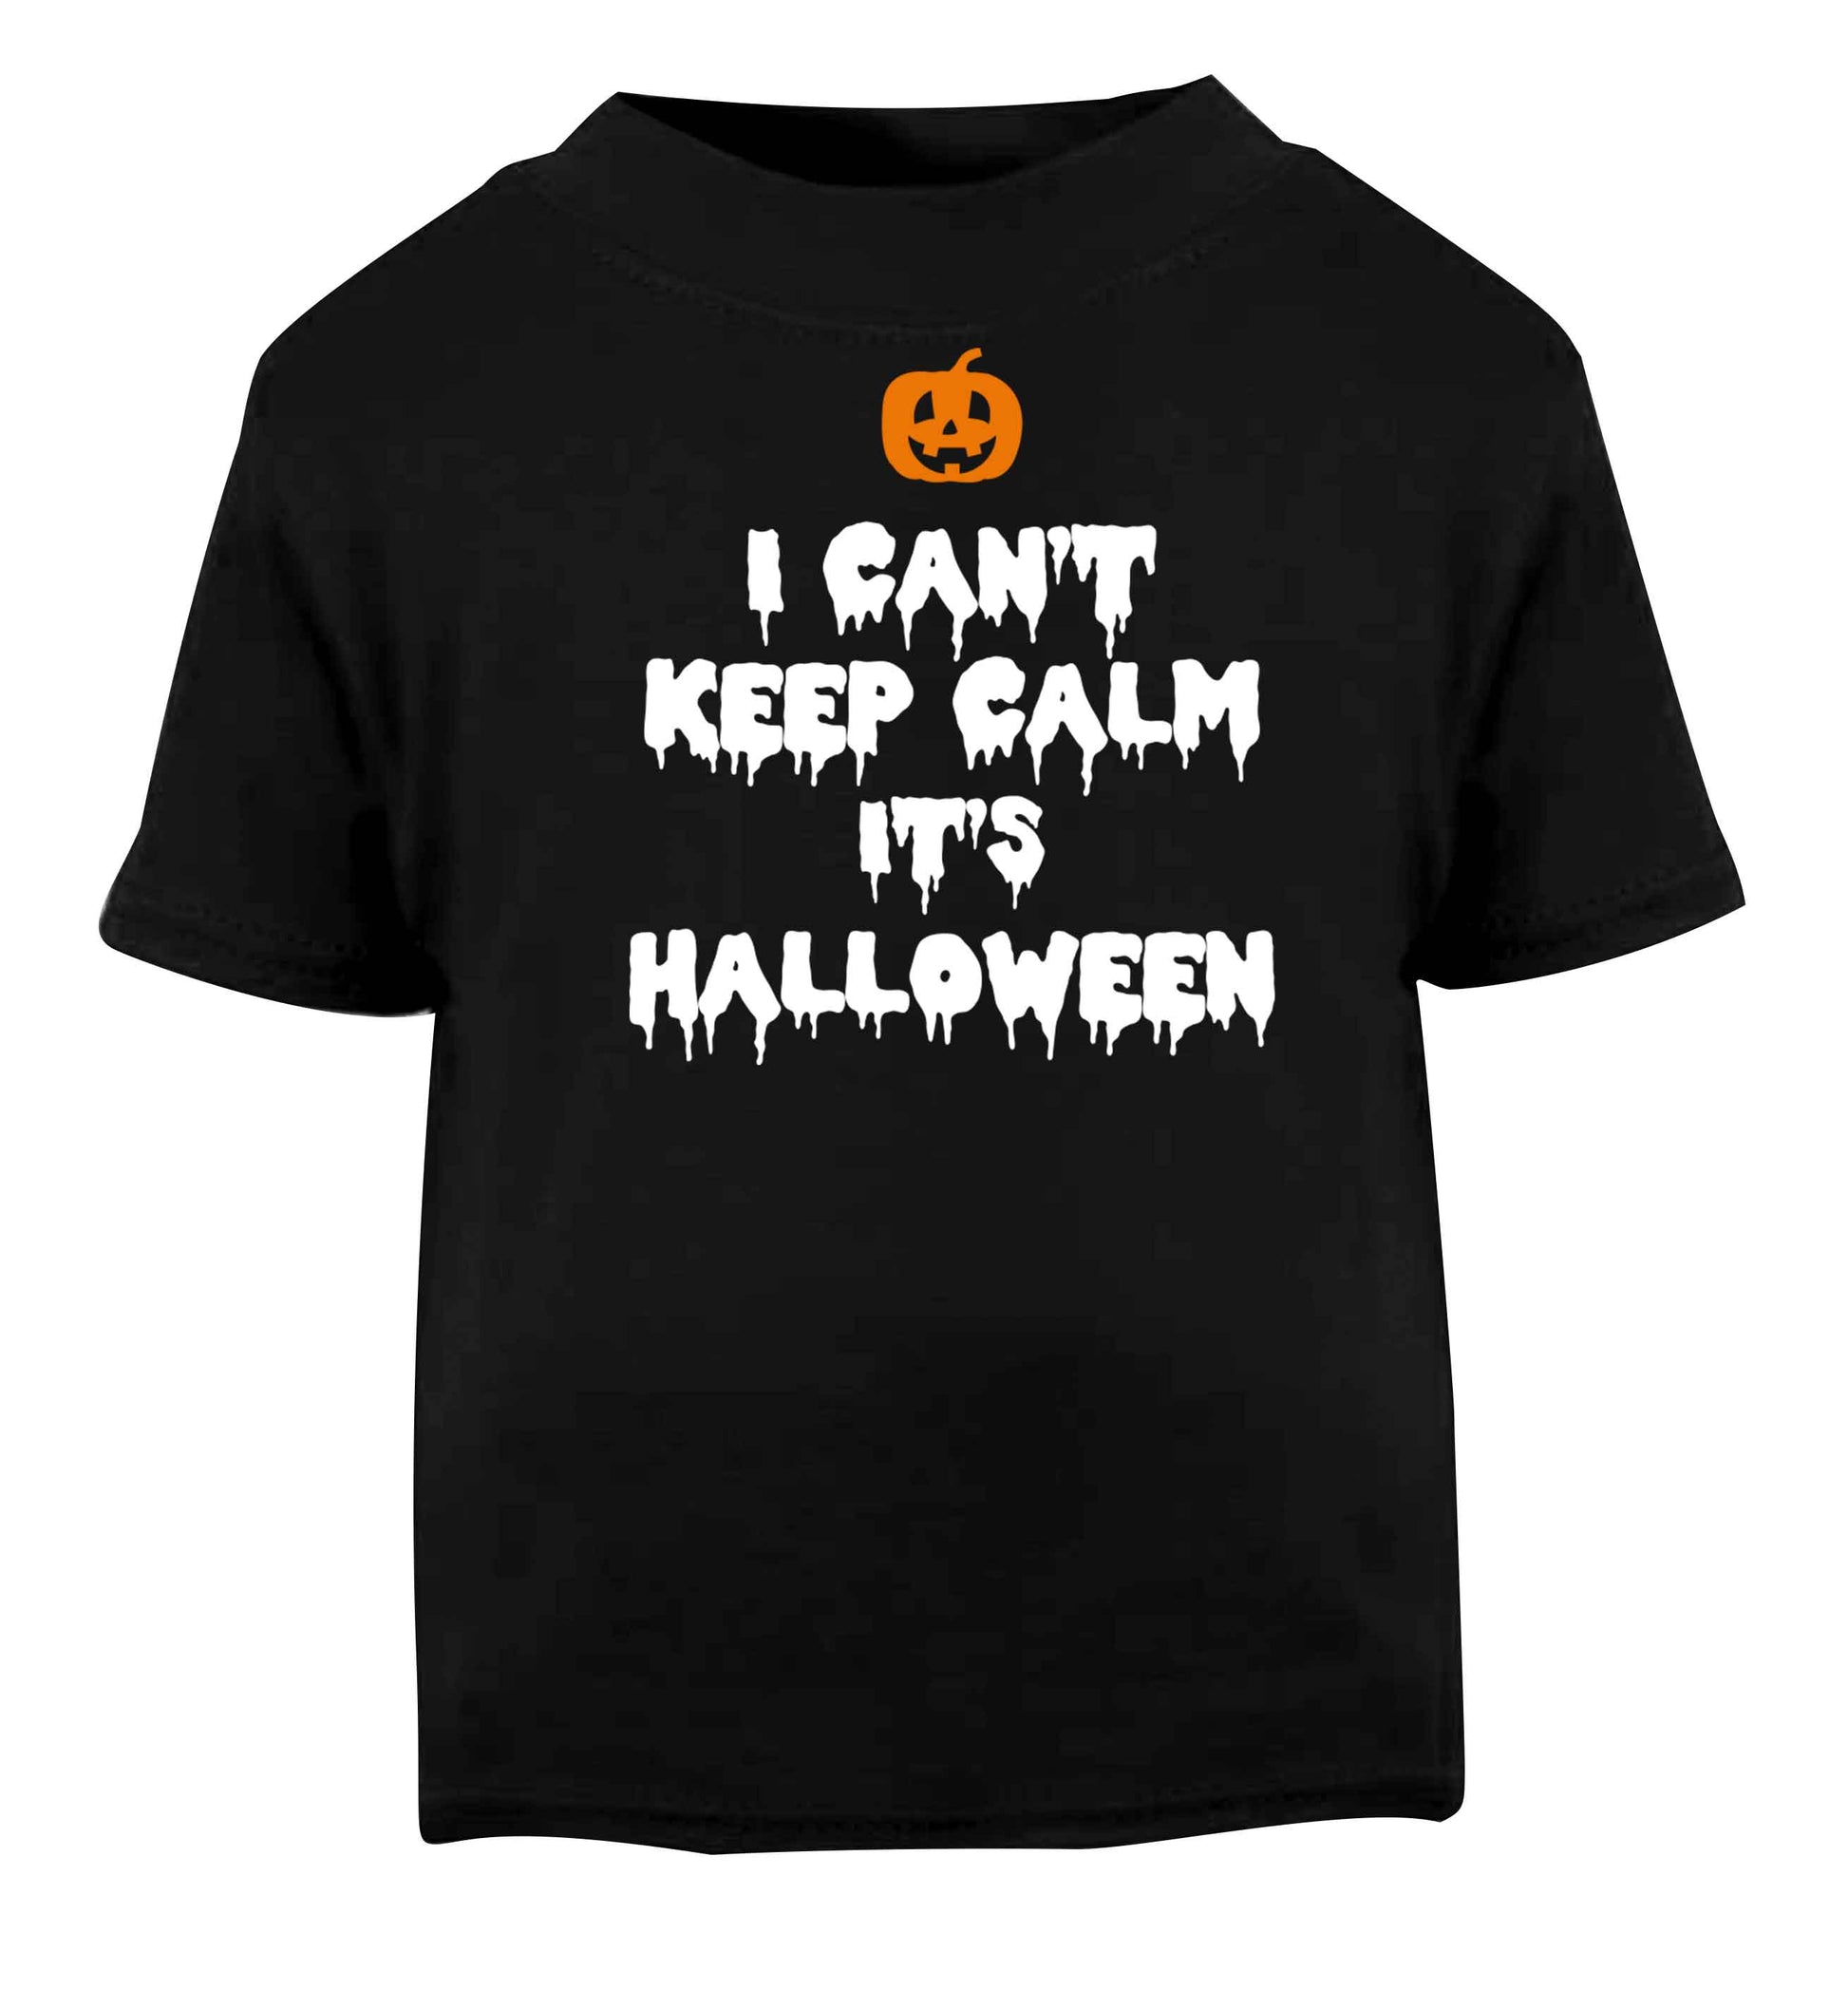 I can't keep calm it's halloween Black baby toddler Tshirt 2 years